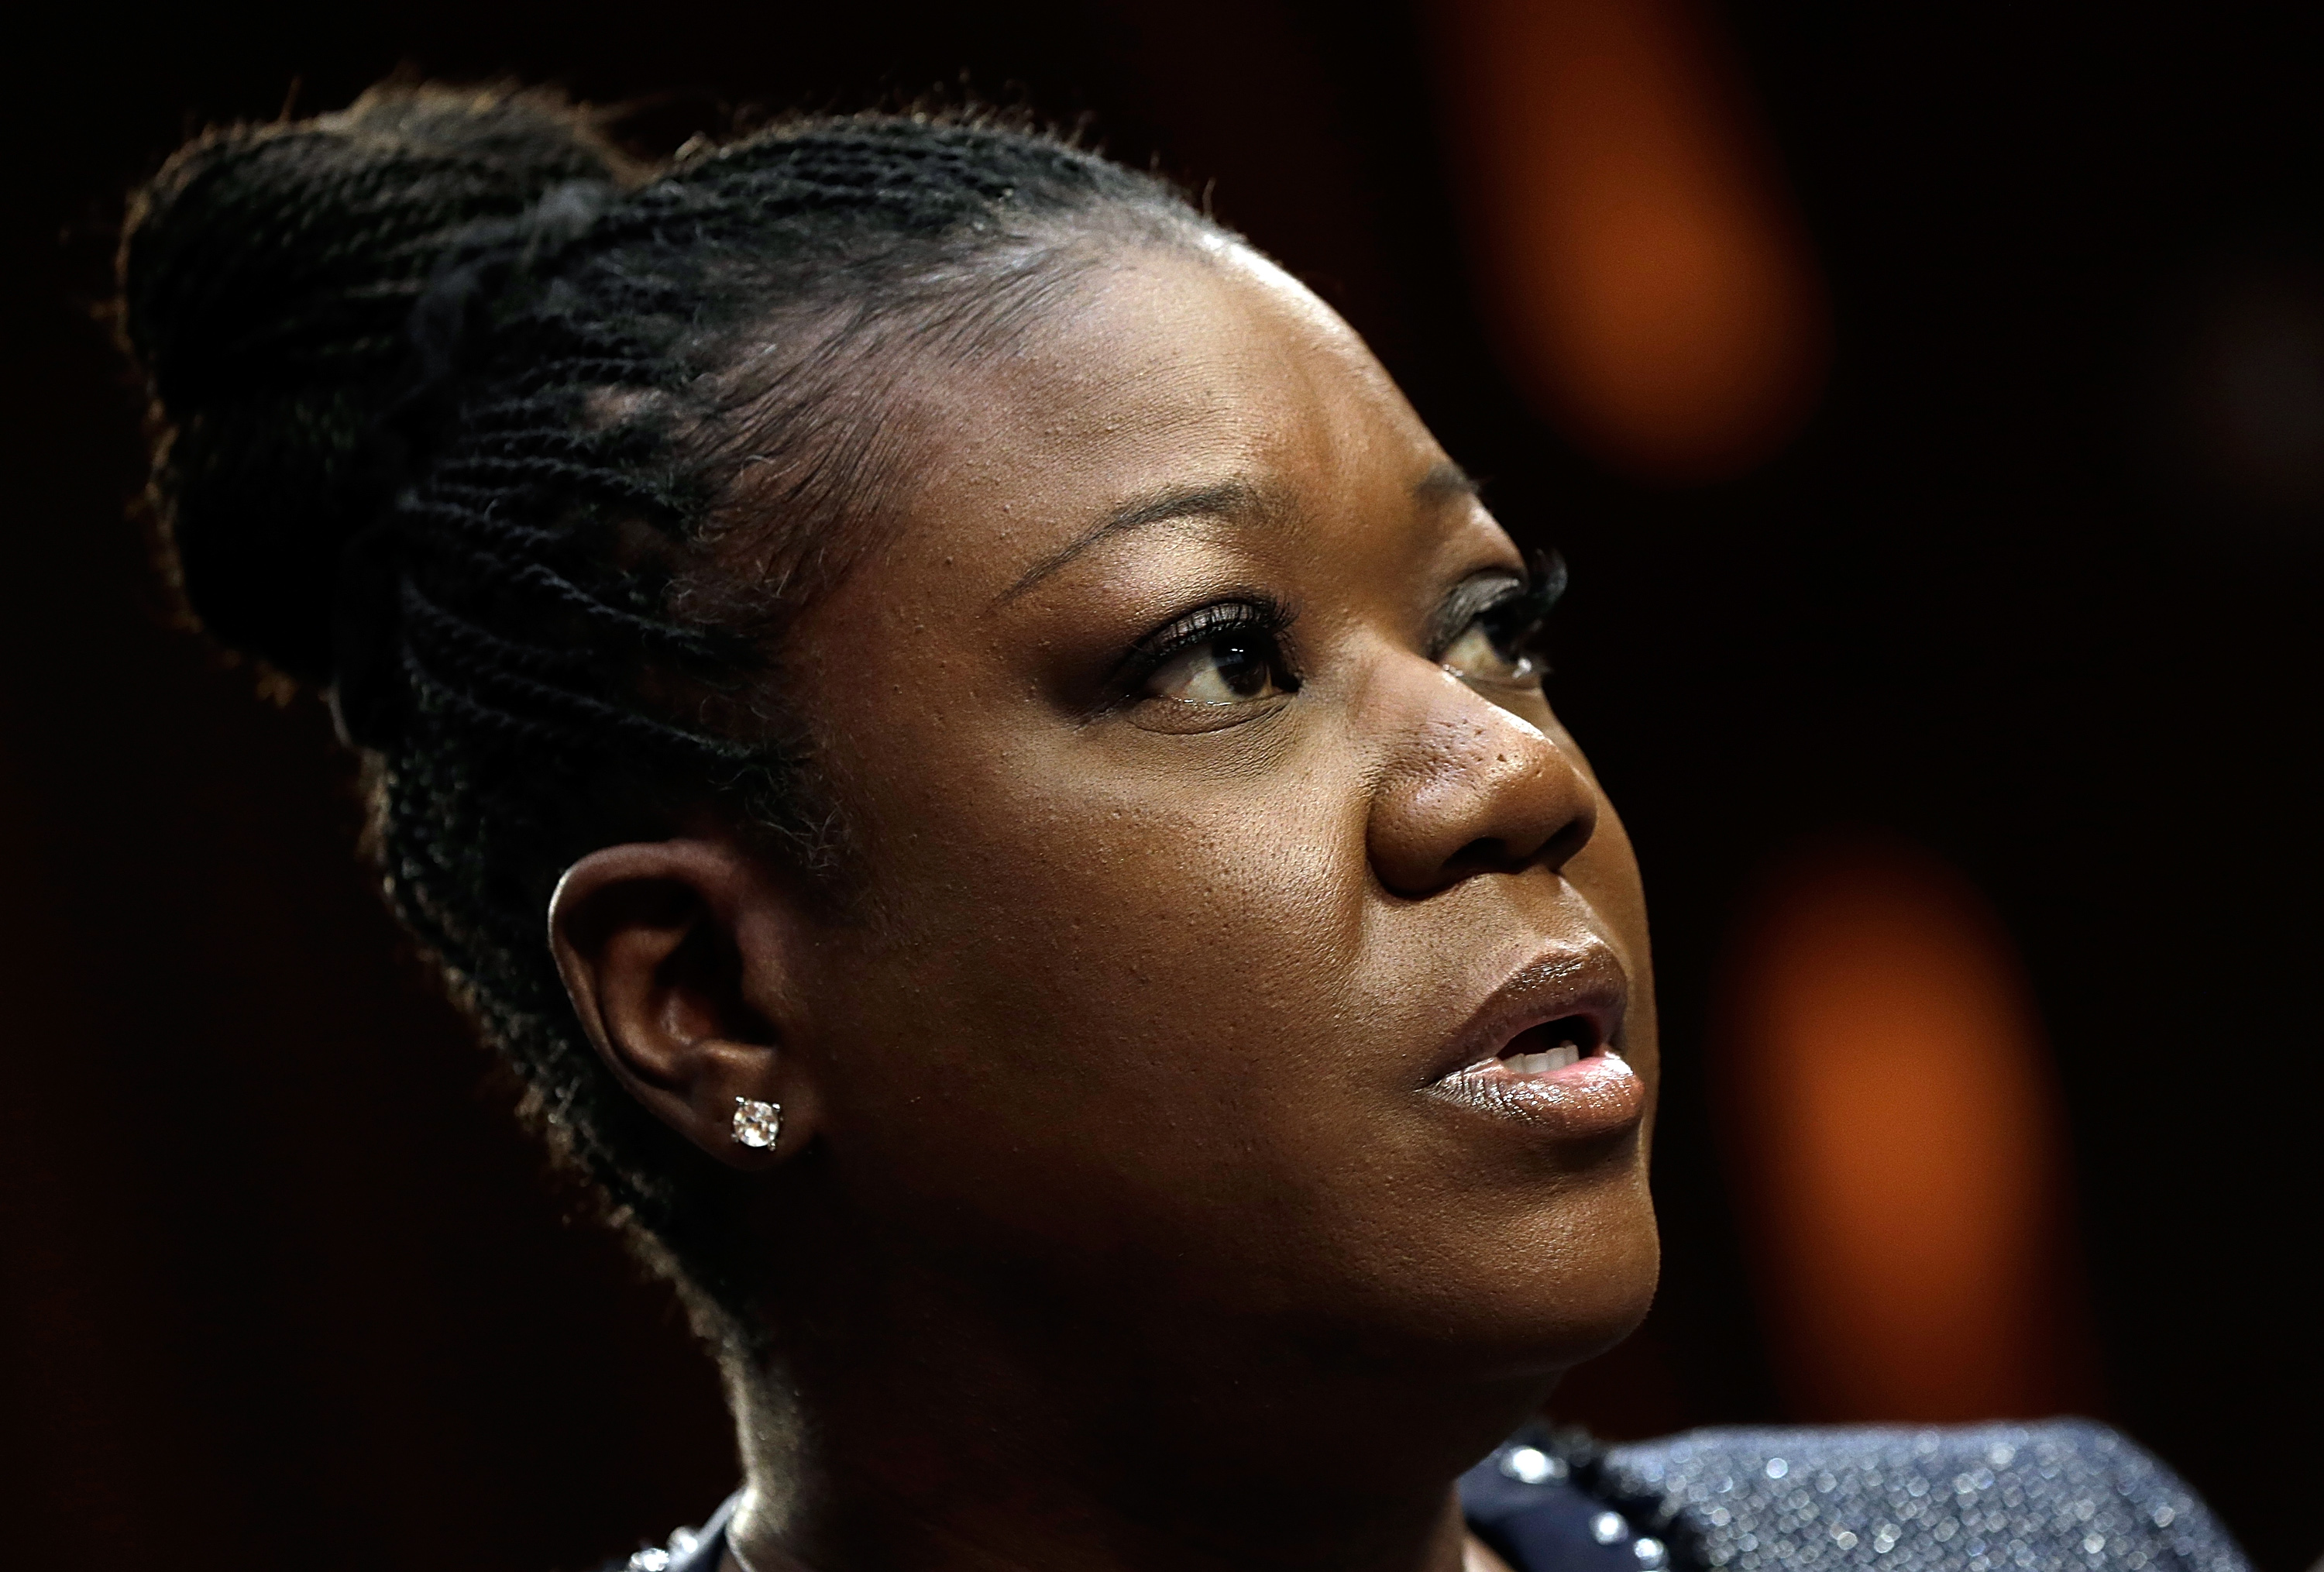 Sybrina Fulton of Miami, Fla., mother of Trayvon Martin, testifies during a Senate Judiciary Committee hearing on "Stand Your Ground" laws October 29, 2013 in Washington DC.